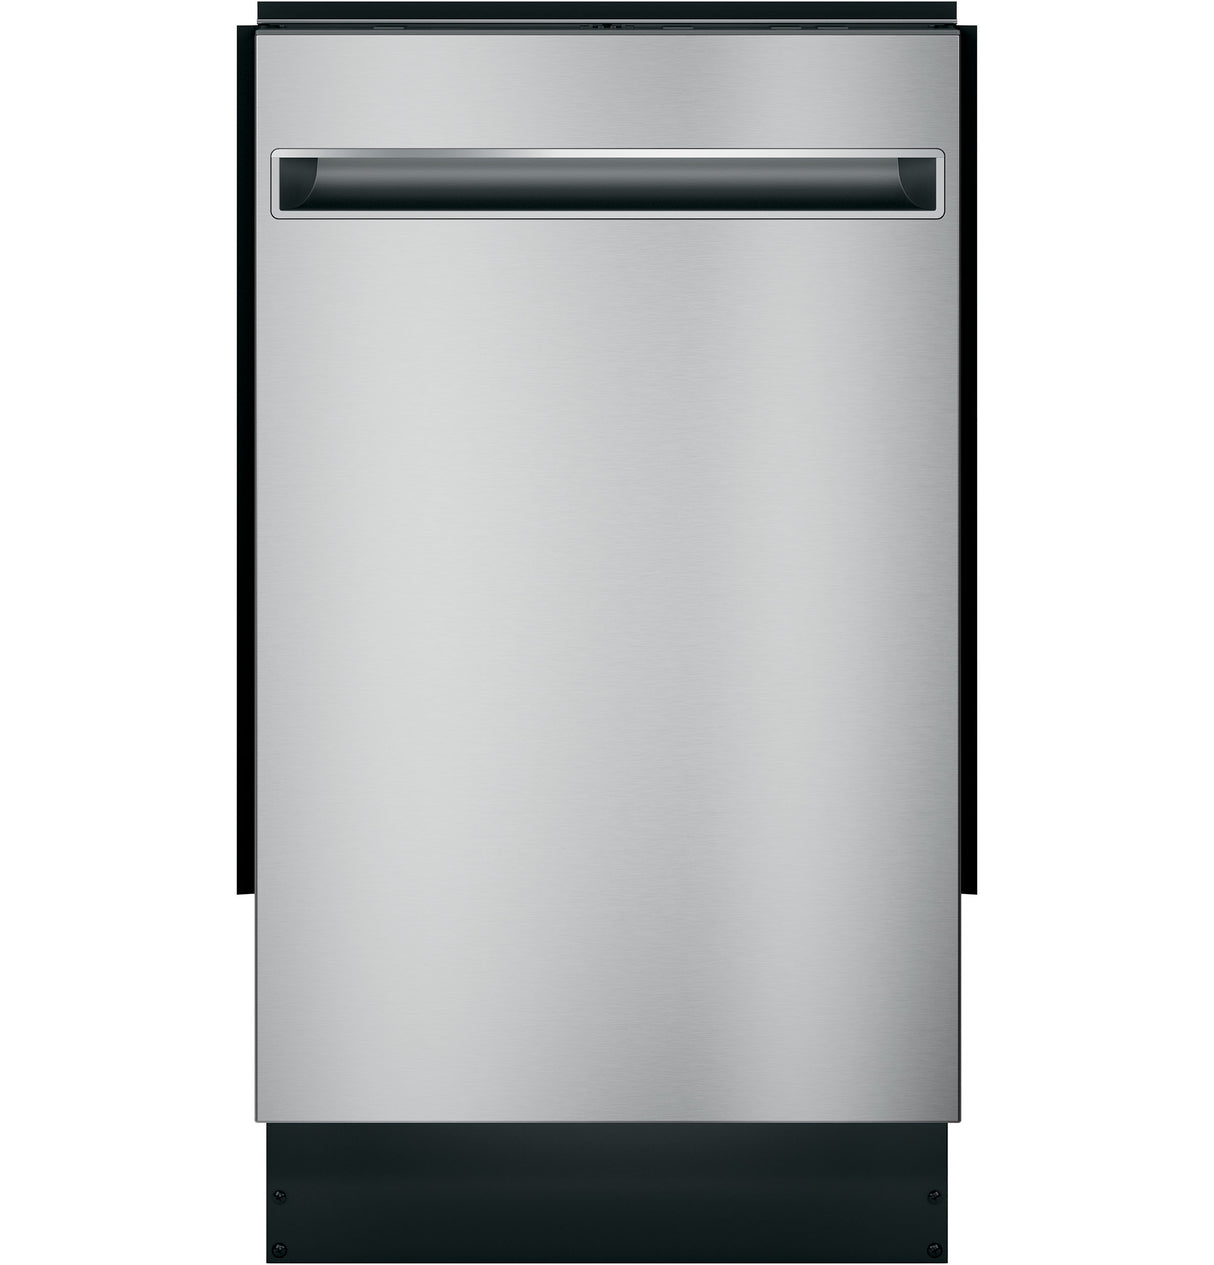 Haier 18" Stainless Steel Interior Dishwasher with Sanitize Cycle - (QDT125SSLSS)